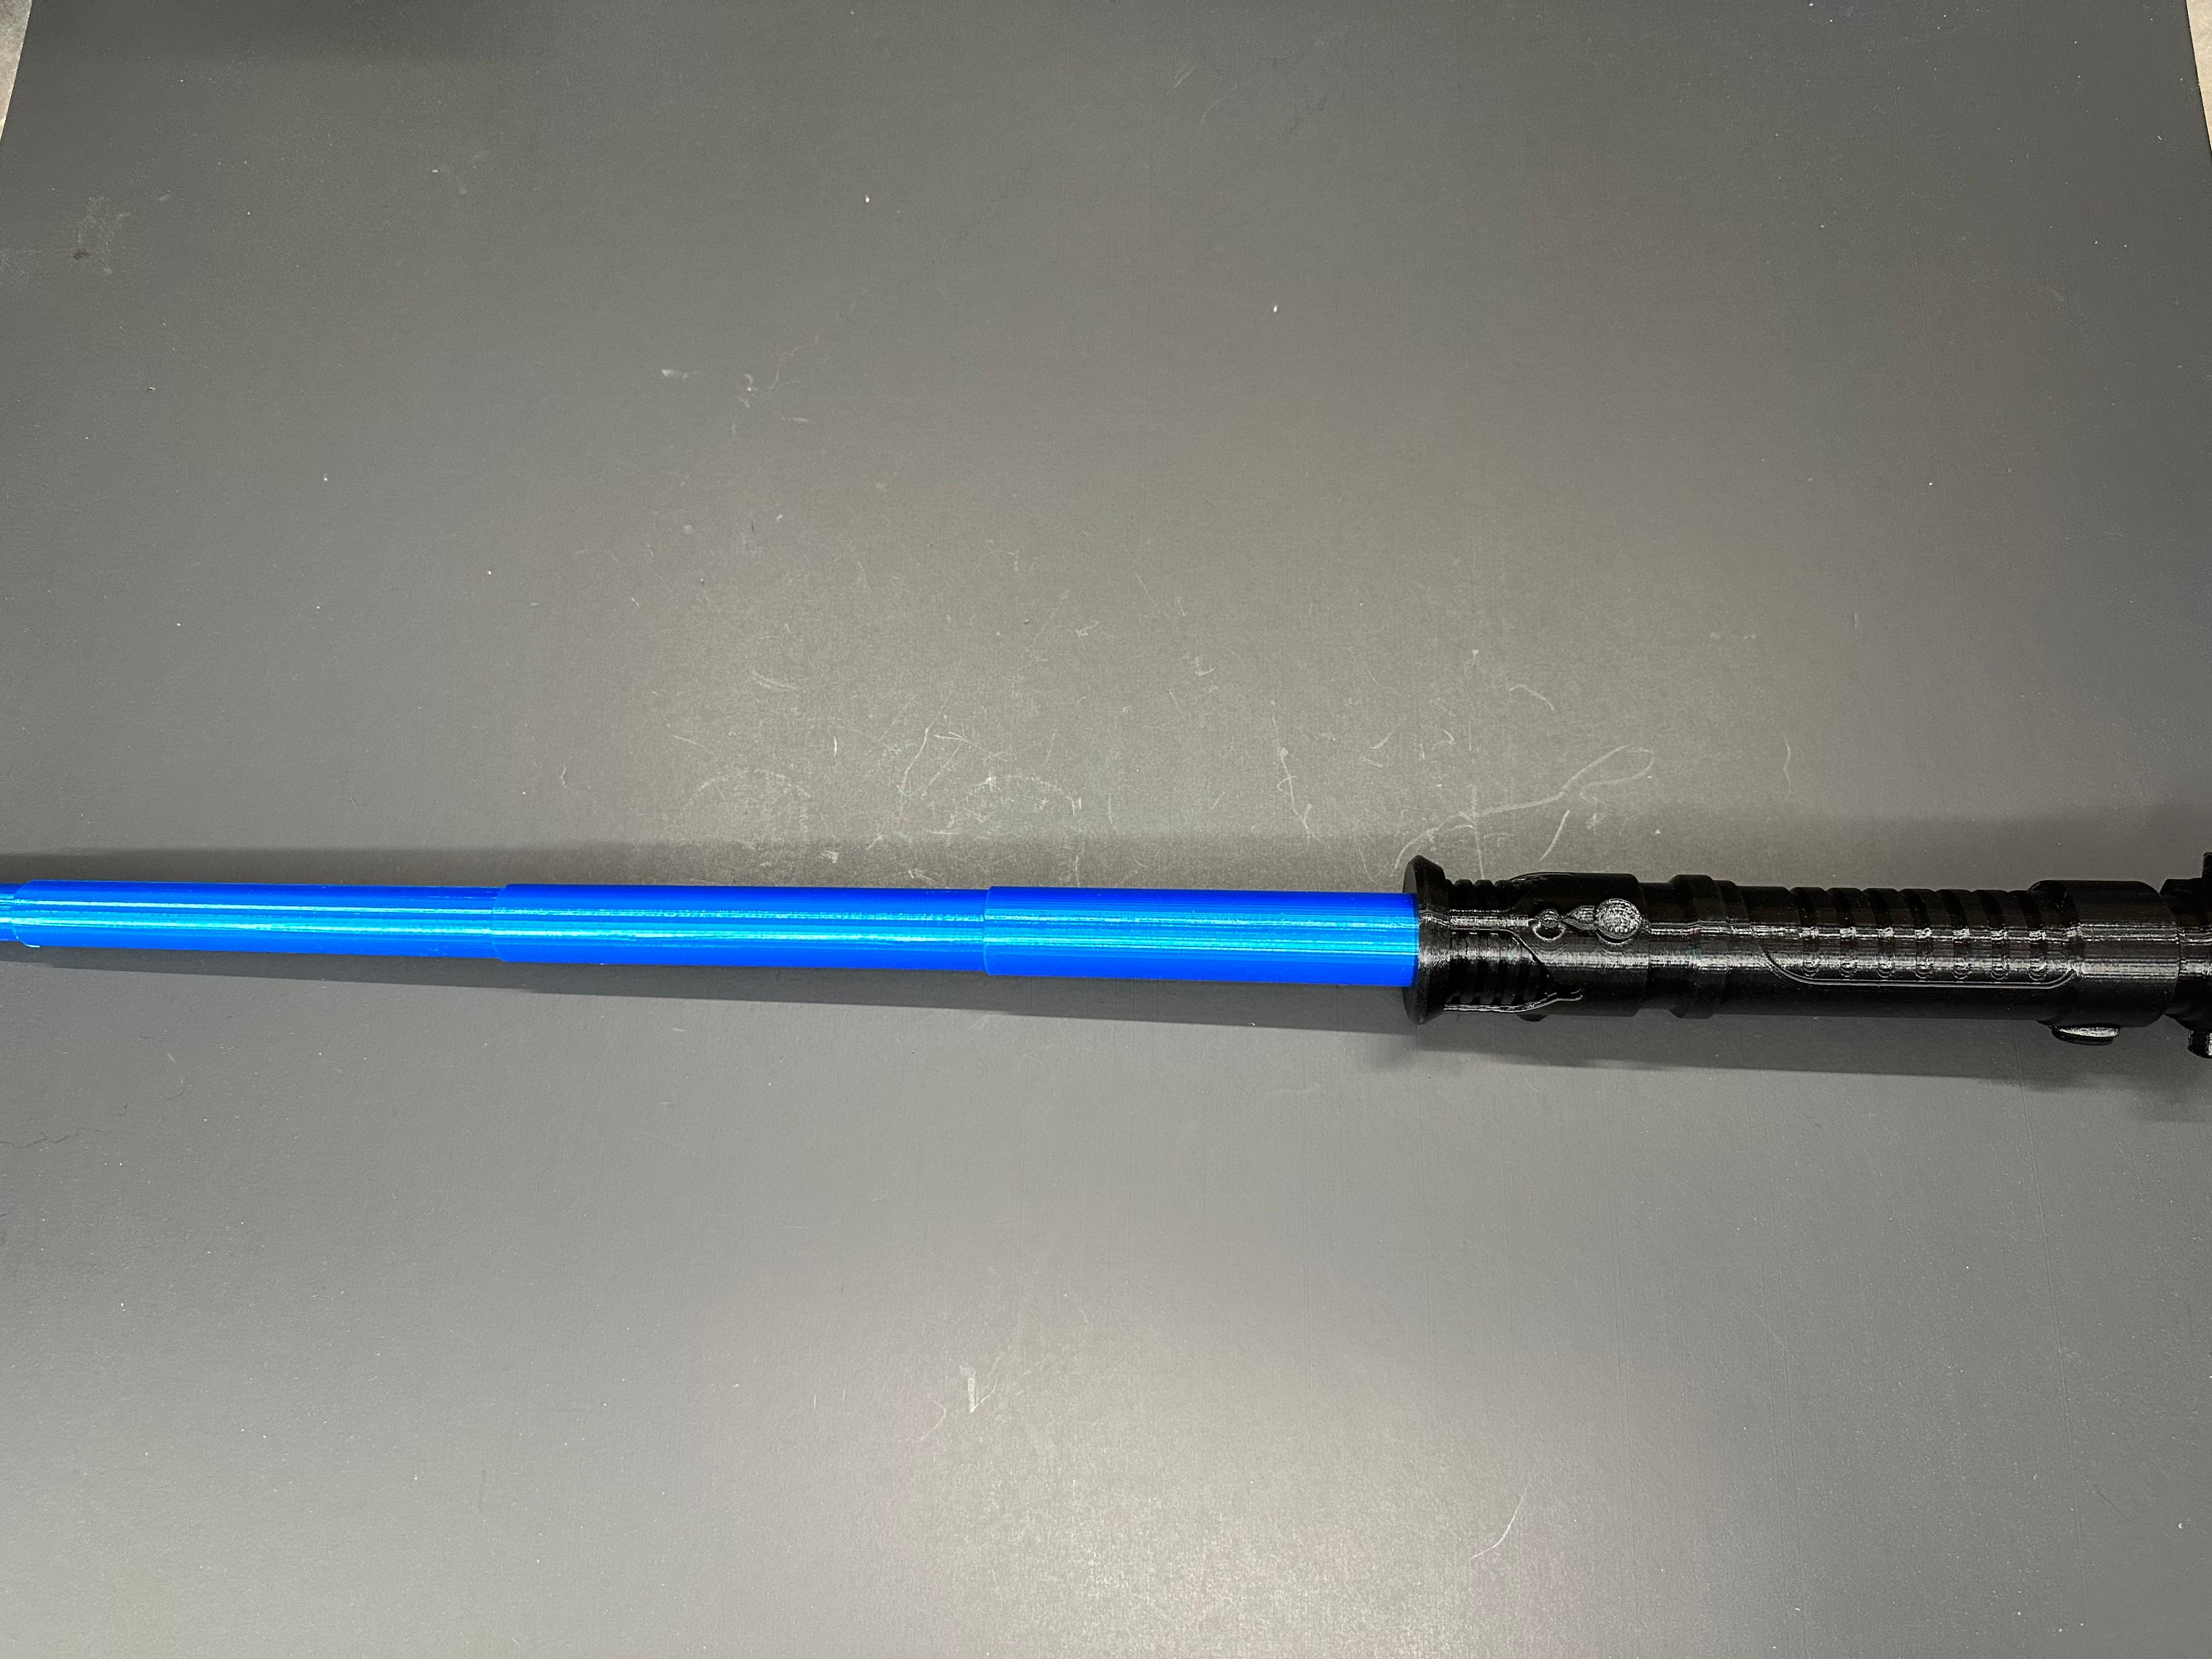 Obi-Wan’s Print-in-Place Collapsible Lightsaber 3d model